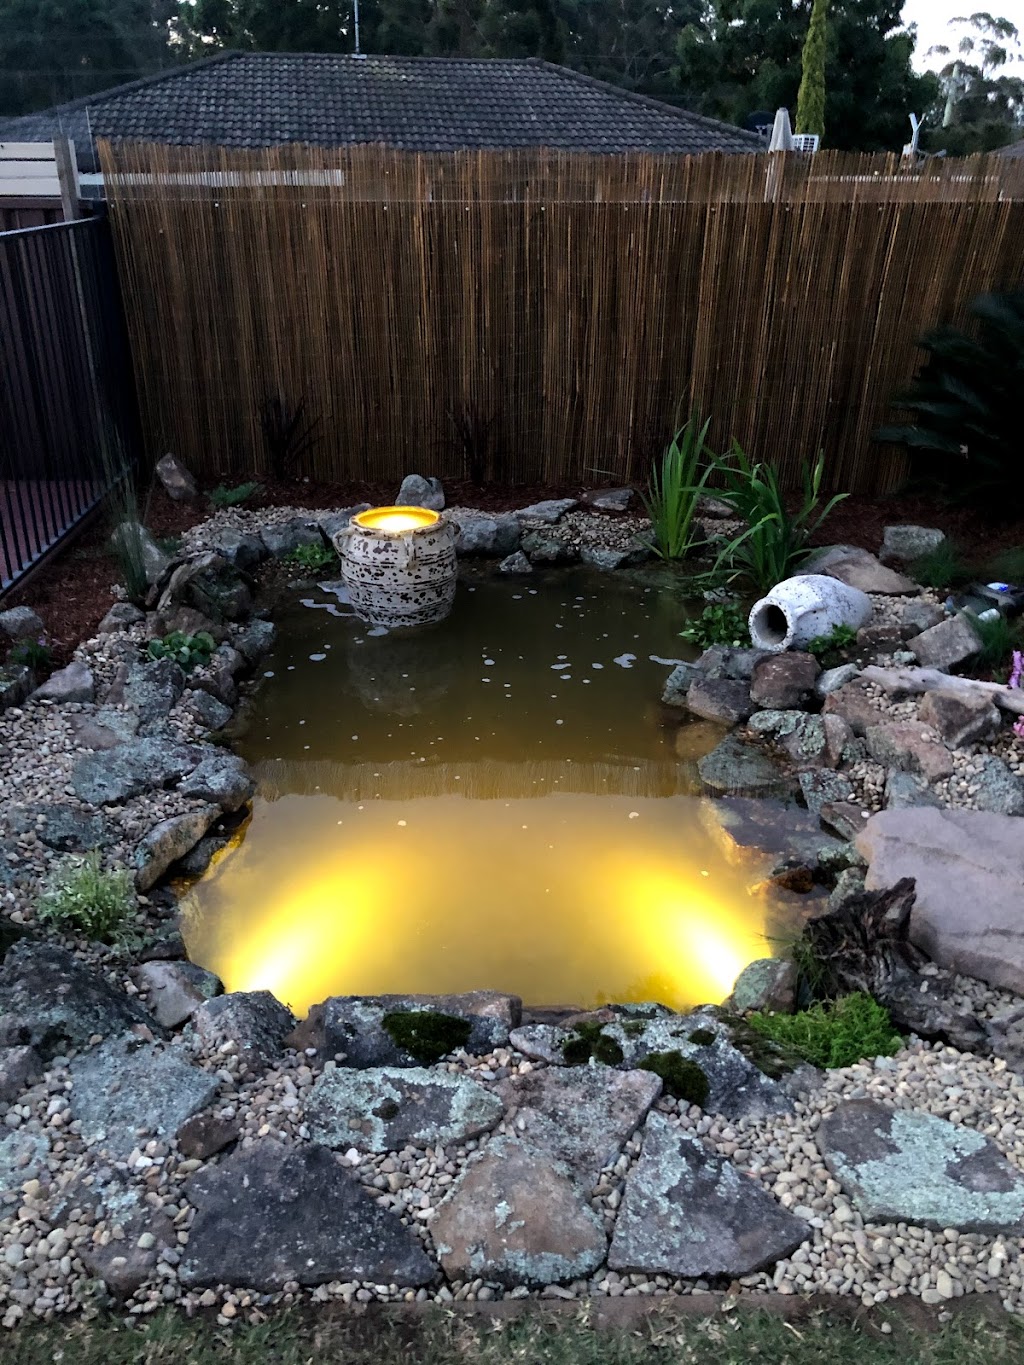 Anything Wet - Ponds & Water Features | pet store | 66 Watagan Forest Dr, Jilliby NSW 2259, Australia | 0415165897 OR +61 415 165 897